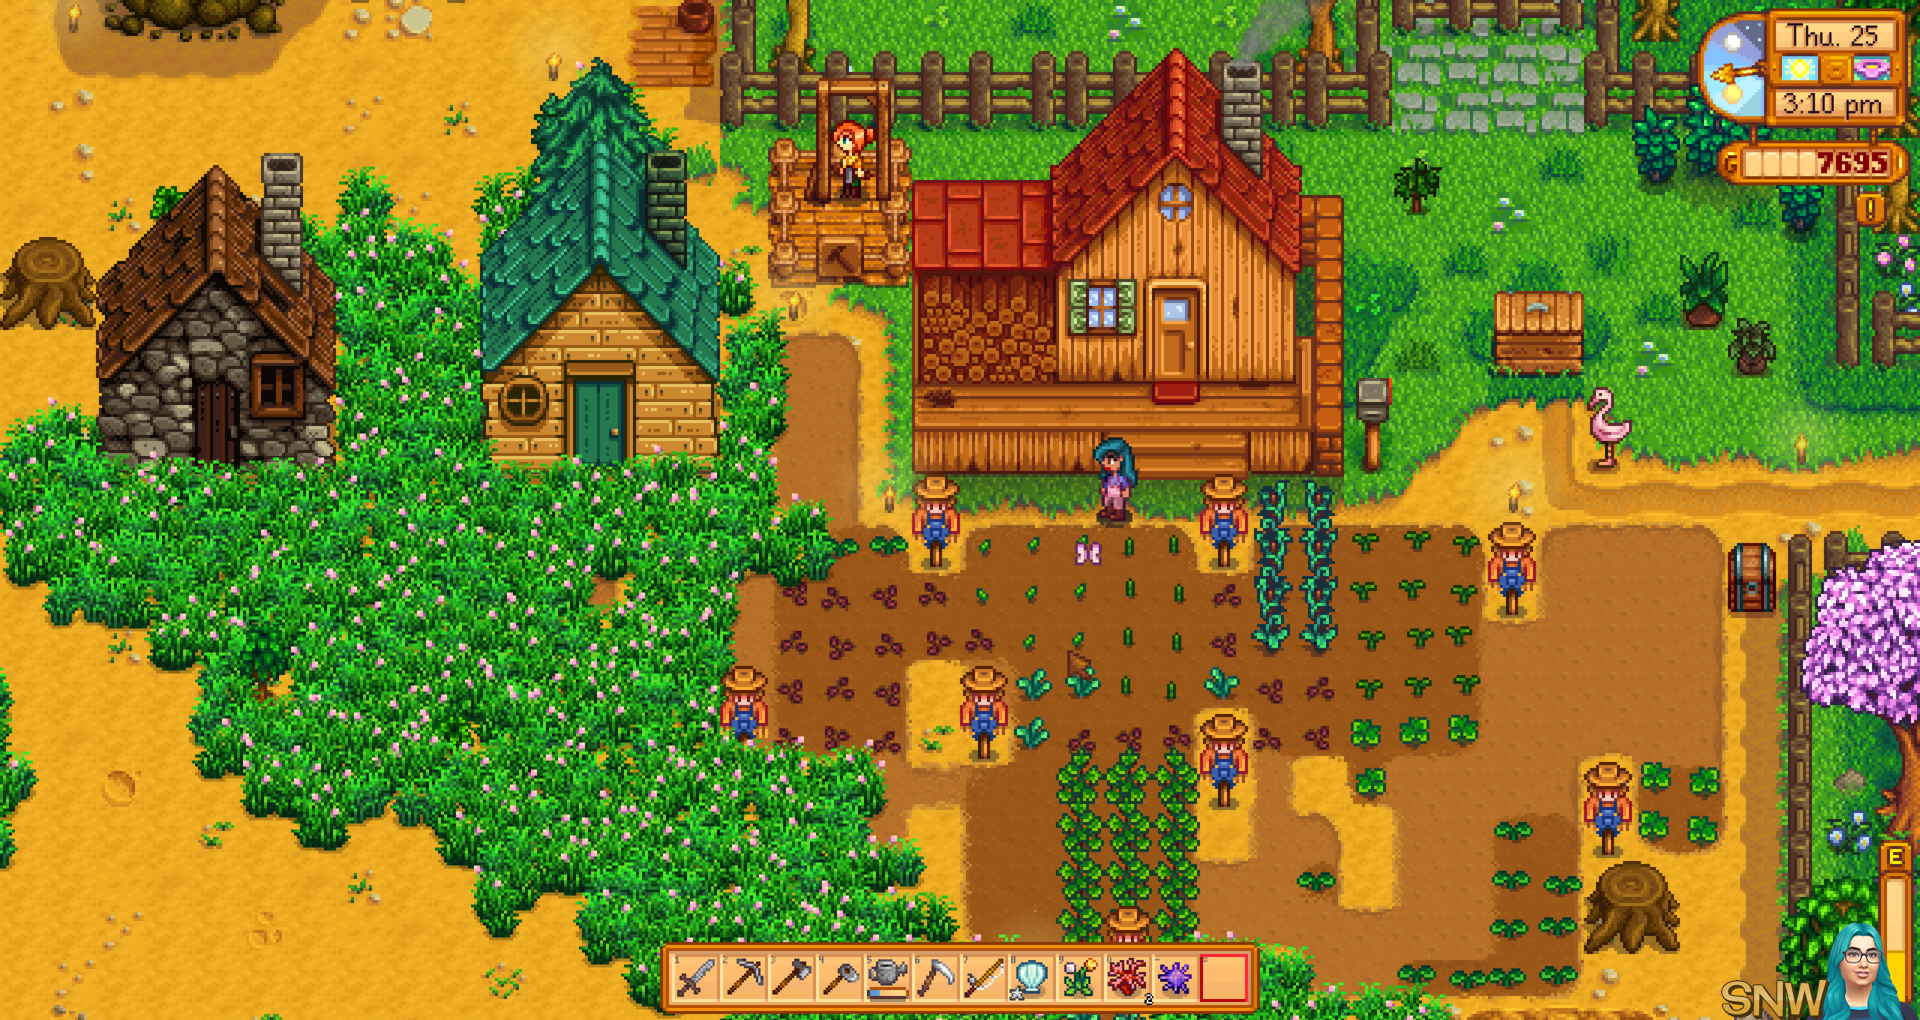 Stardew Valley co-op/multiplayer mode!  SNW  SimsNetwork.com